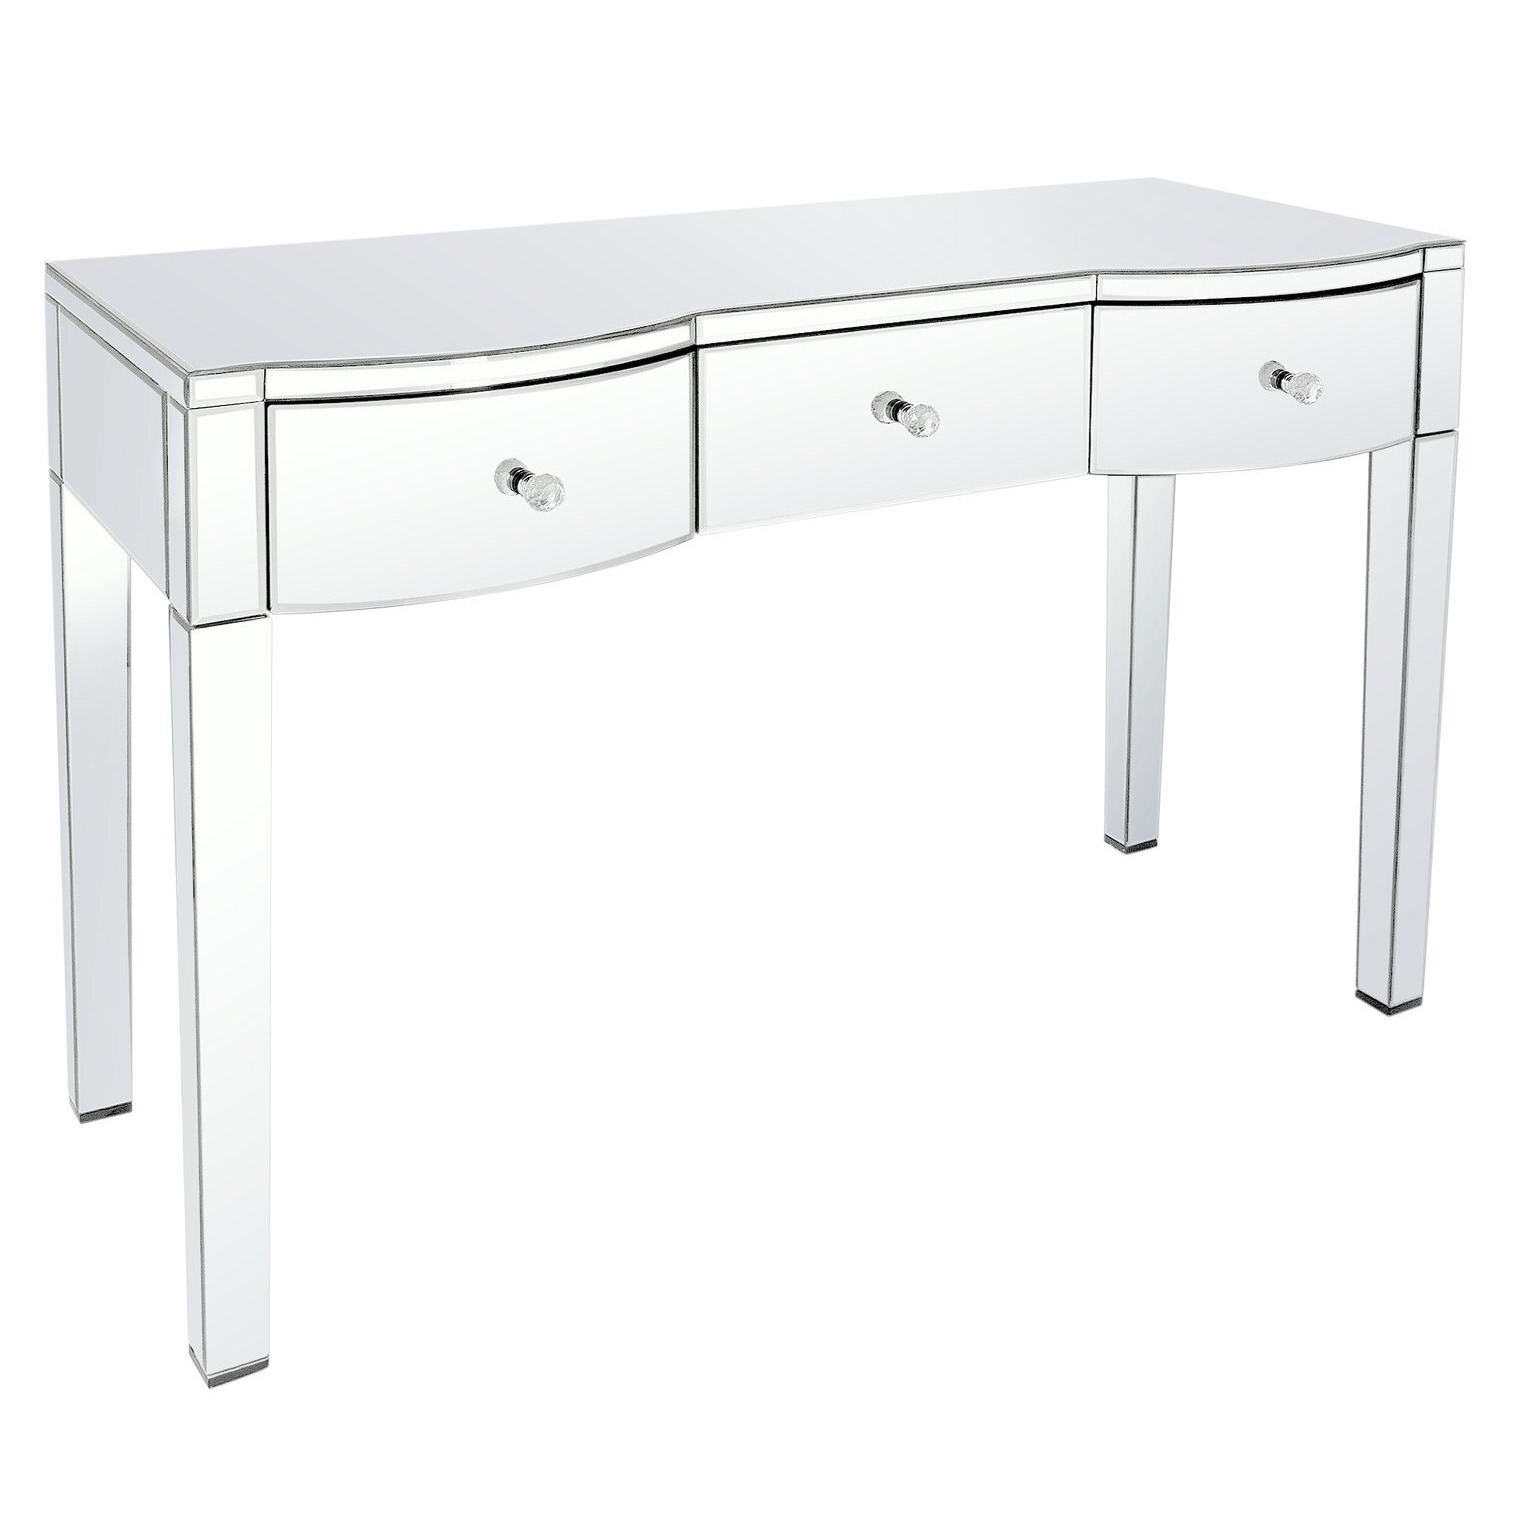 Argos Home Canzano 3 Drawer Dressing Table - Mirror - image 1